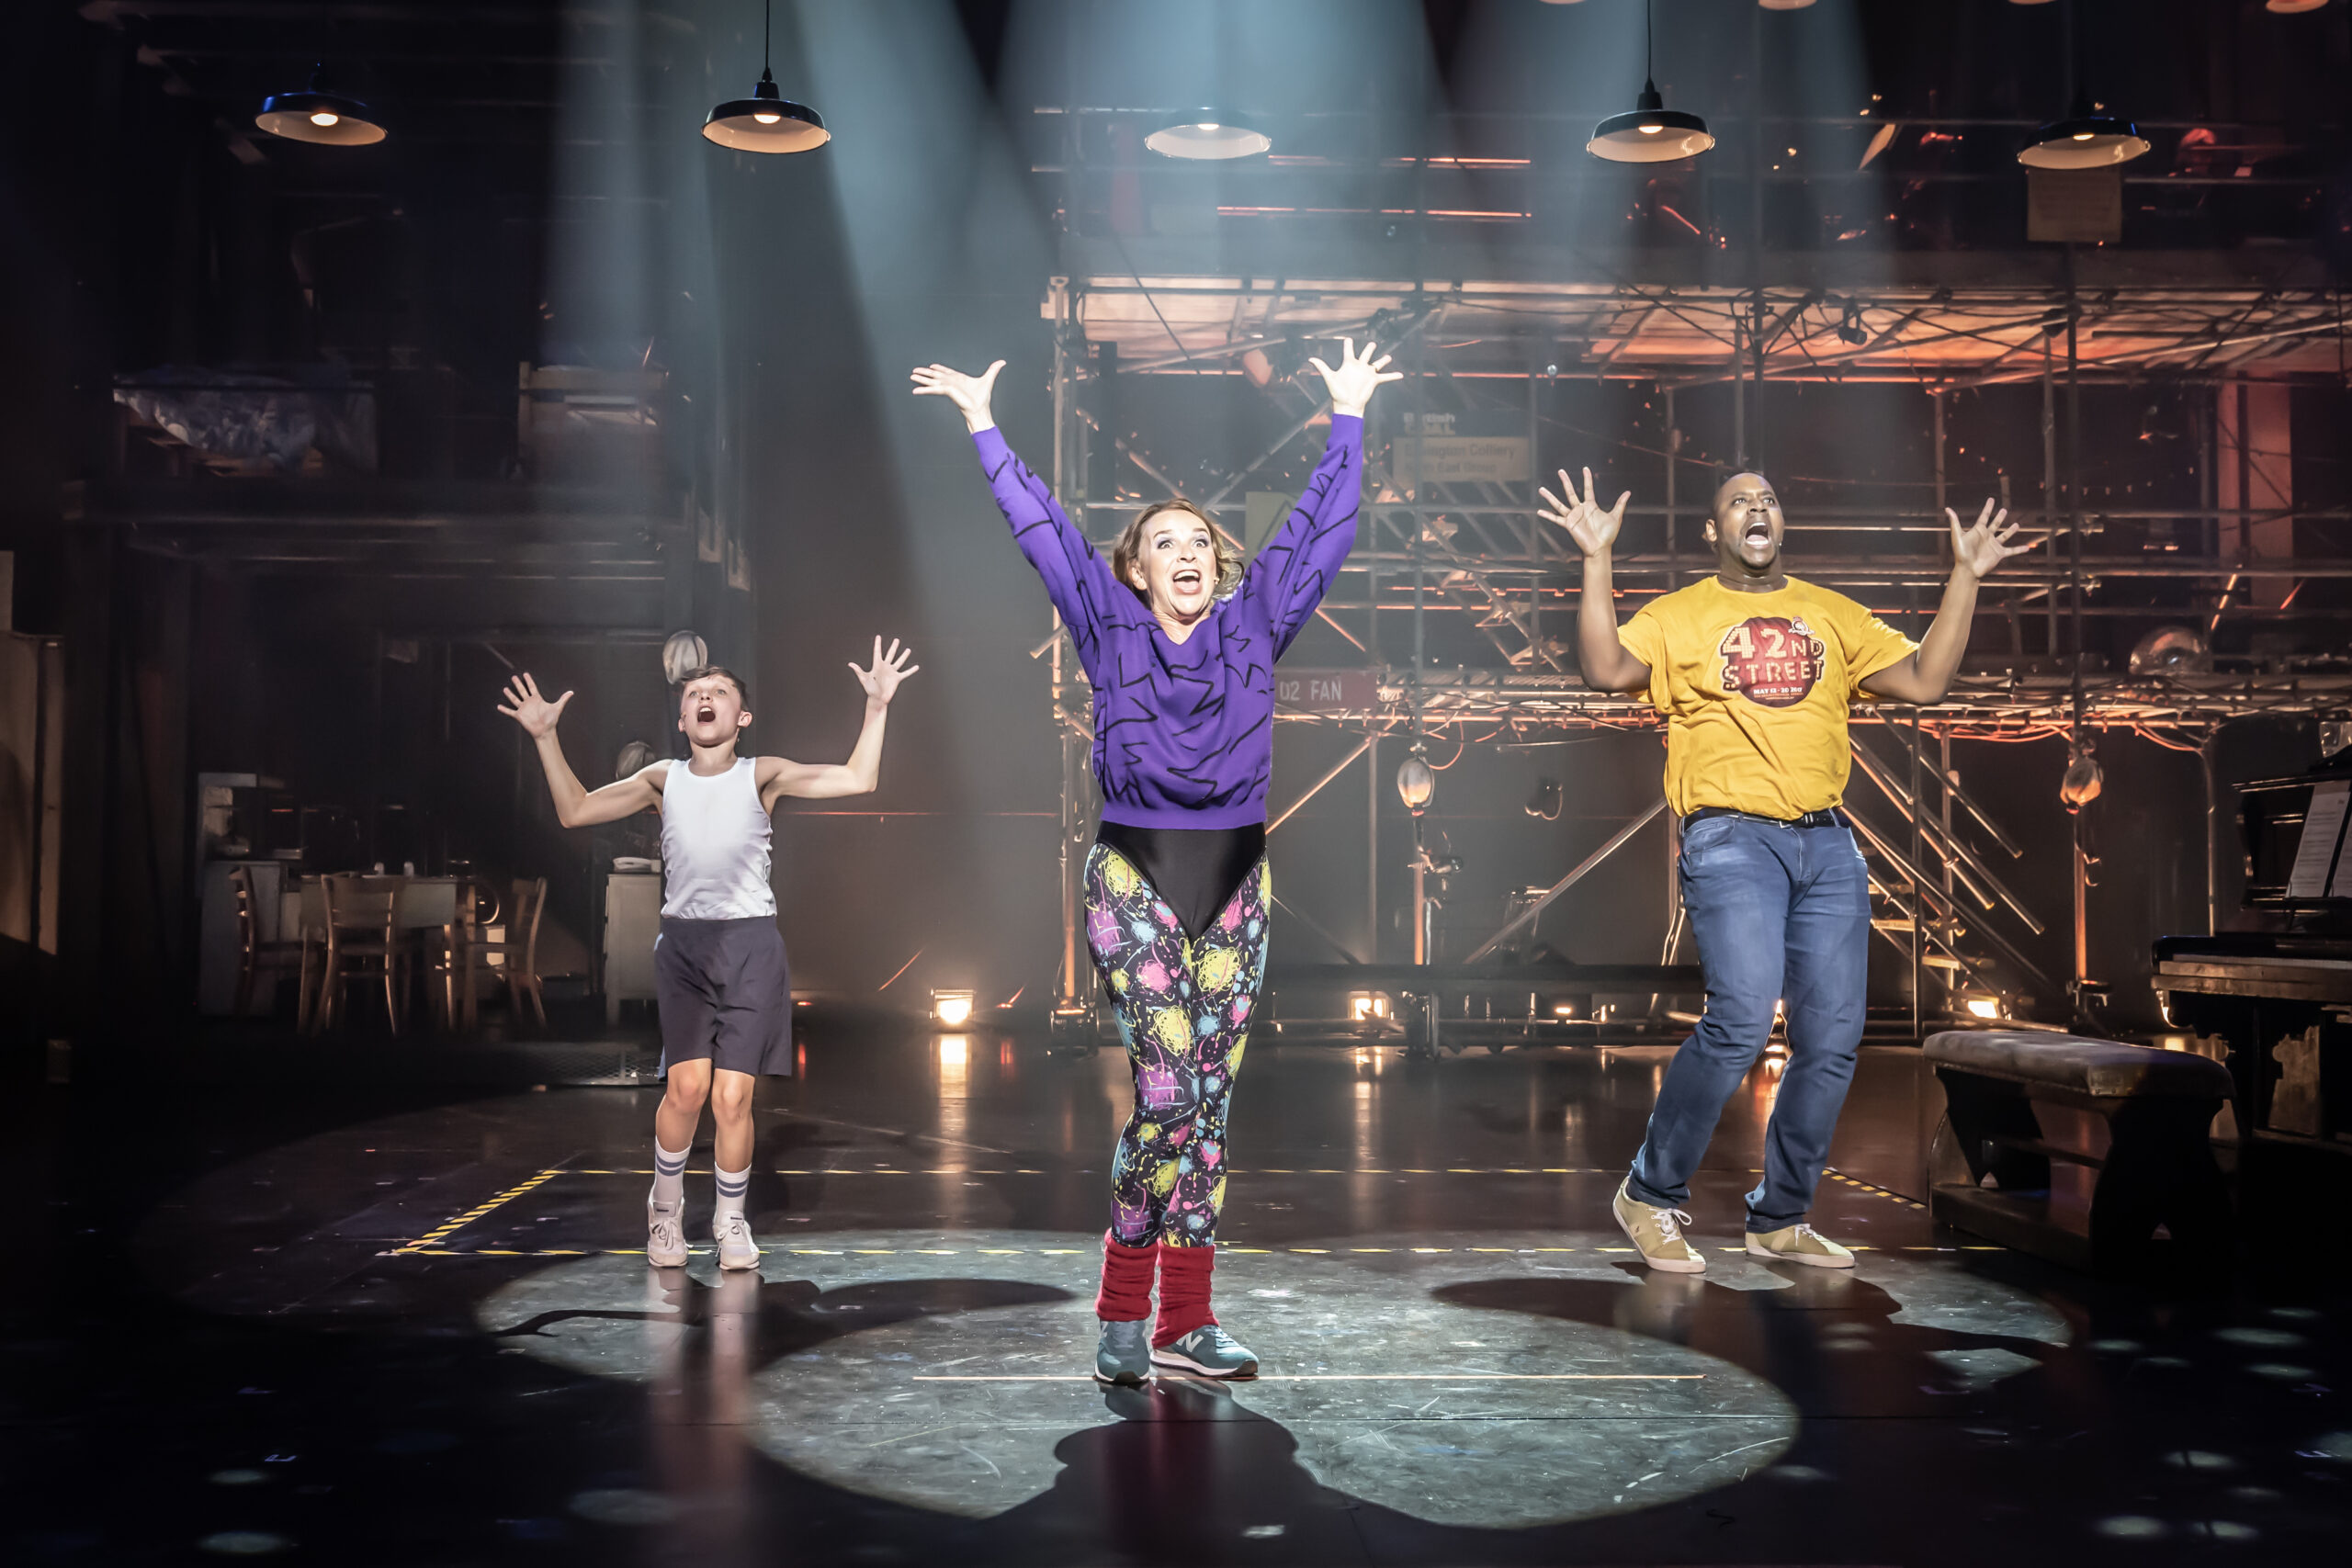 Production photograph from Billy Elliot. Billy Elliot (Jaden Shentall-Lee), Mrs Wilkinson (Sally Ann-Triplett) and Mr Braithwaite (Cameron Johnson) dance together jubilantly in the community hall. Billy and Mrs Wilkinson wear 1980s workout clothes, and Mr Braithwaite wears jeans and a Musical Theatre t-shirt.